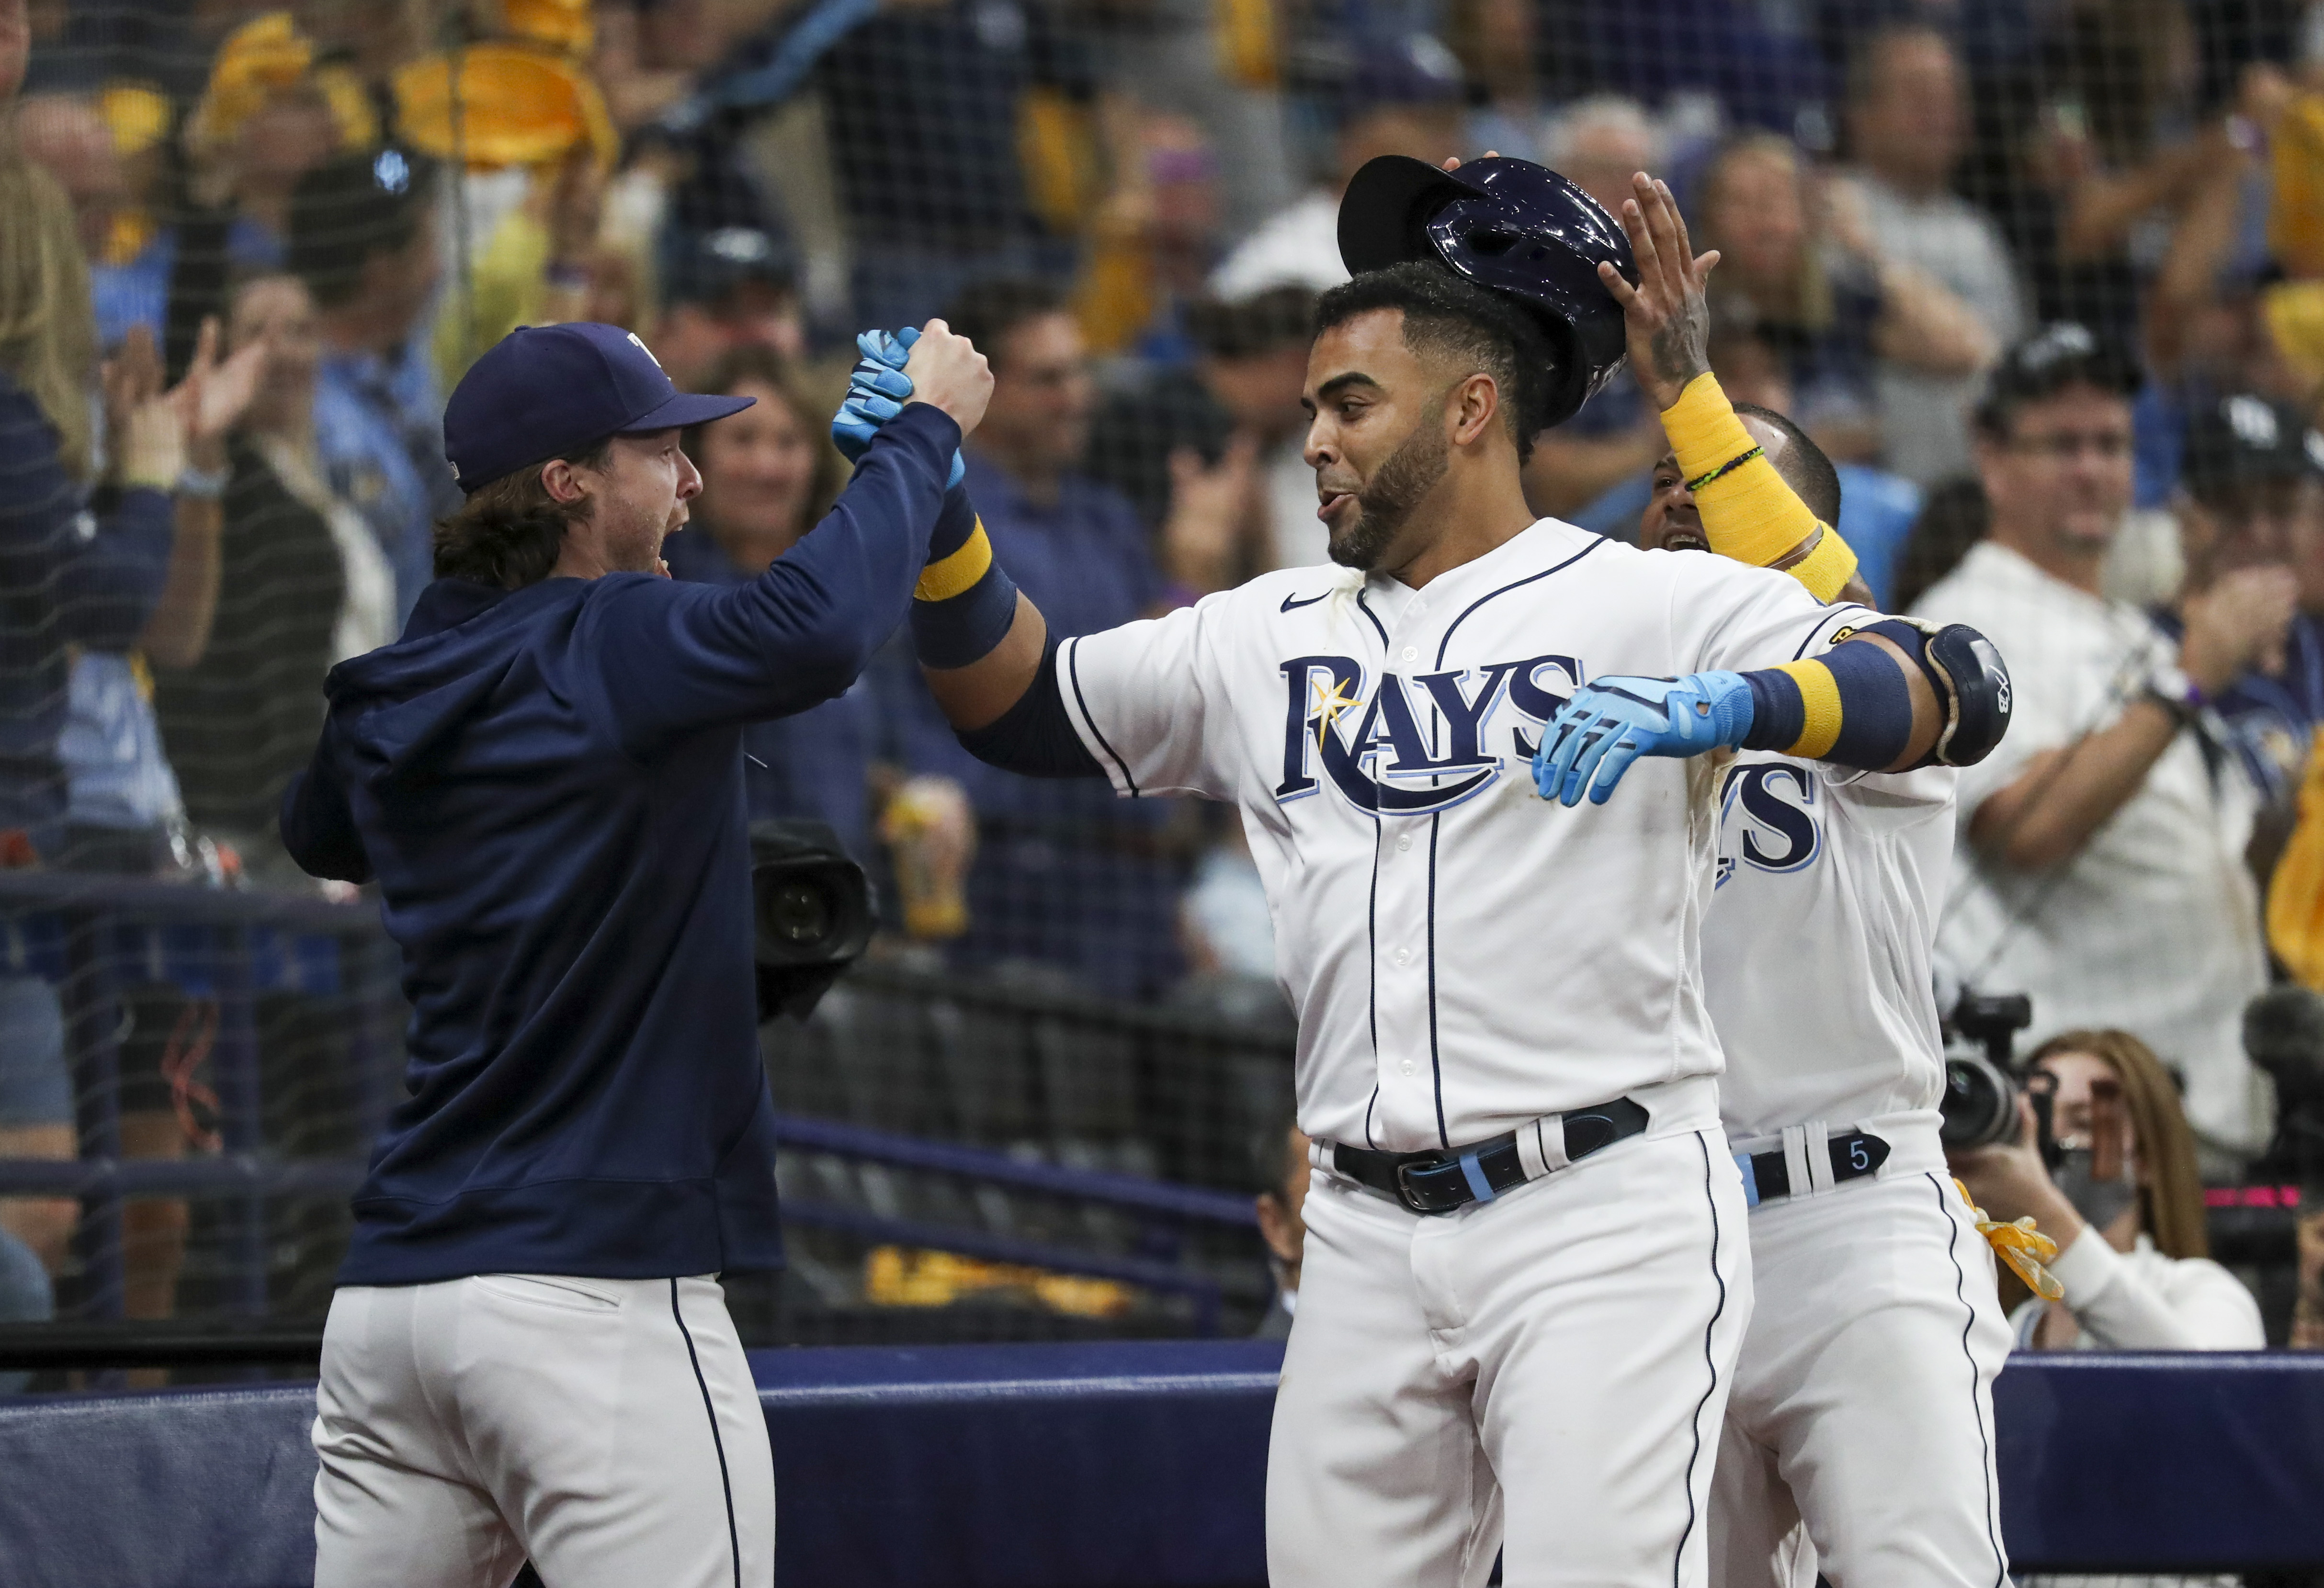 Rays outfielder Brett Phillips emotional after hitting home run